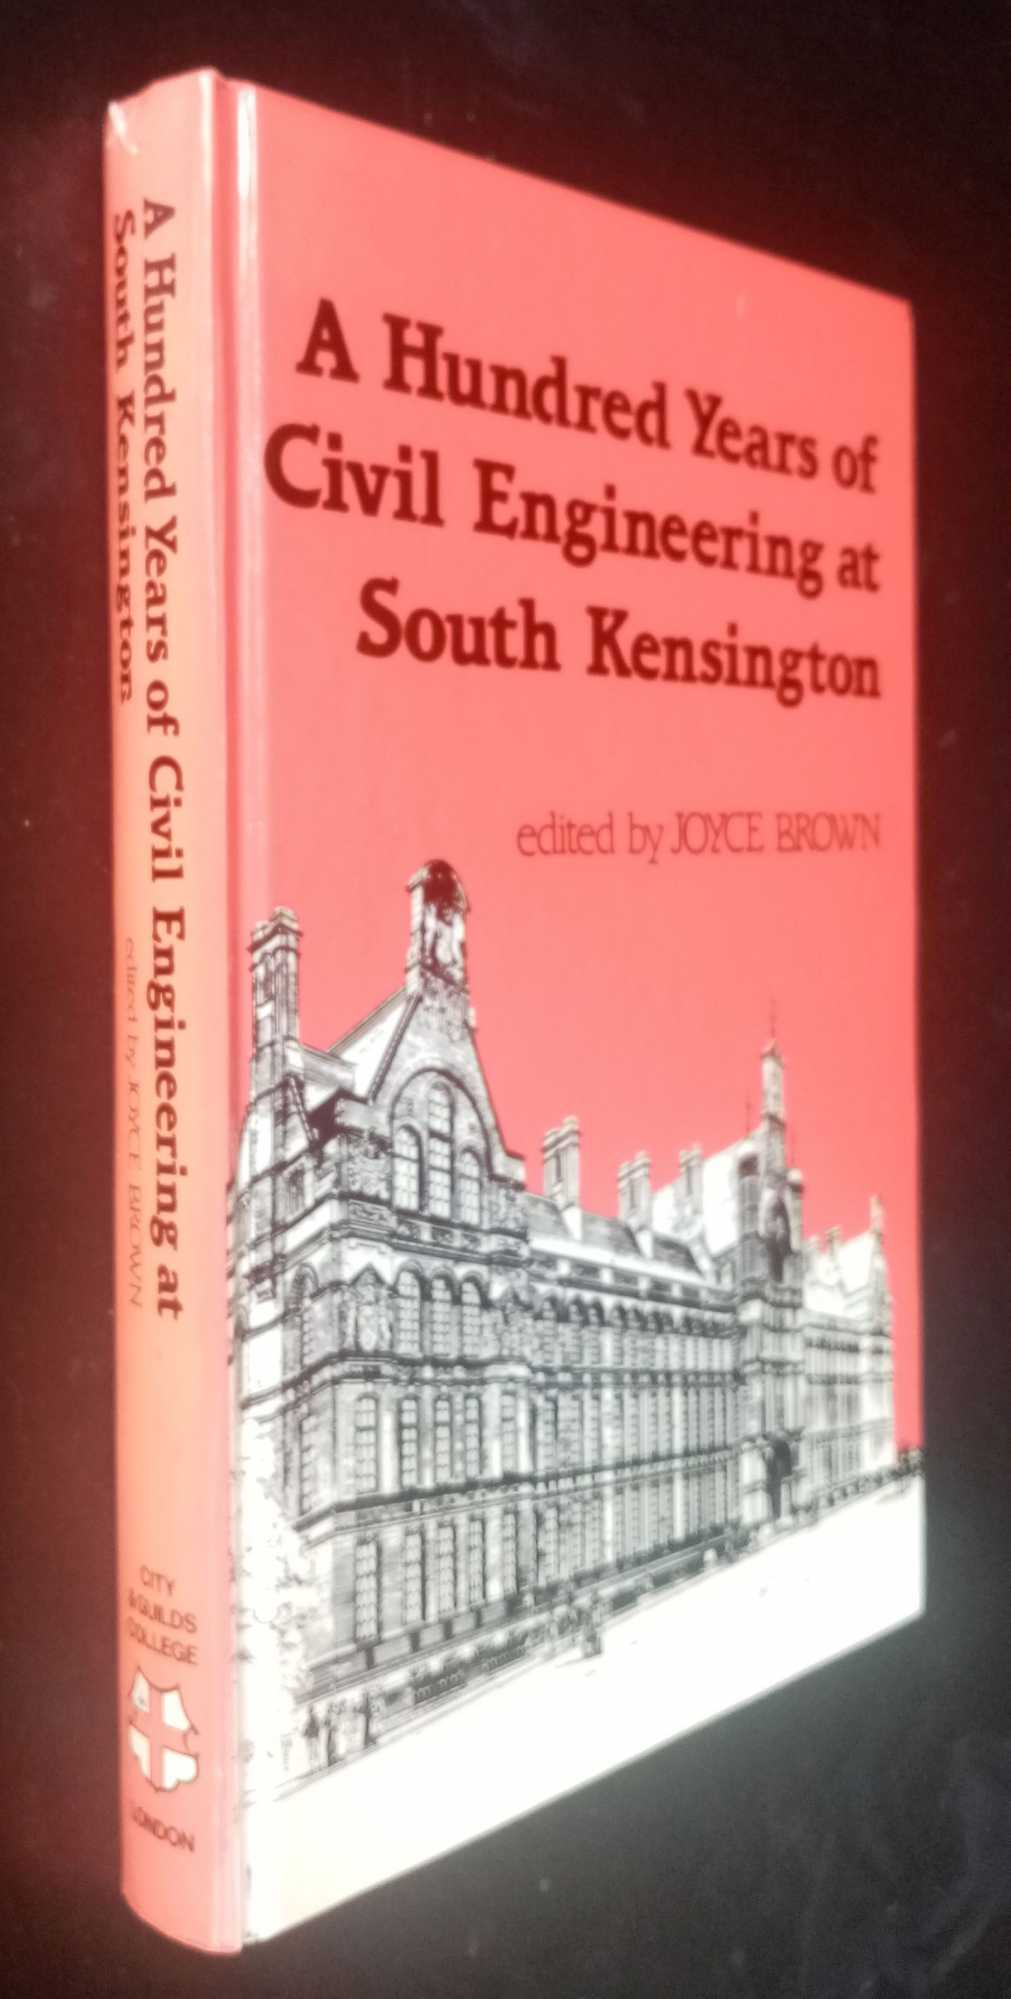 Joyce Brown, ed. - A Hundred Years of Civil Engineering at South Kensington: The Origins and History of the Department of Civil Engineering, Imperial College, 1884-1984